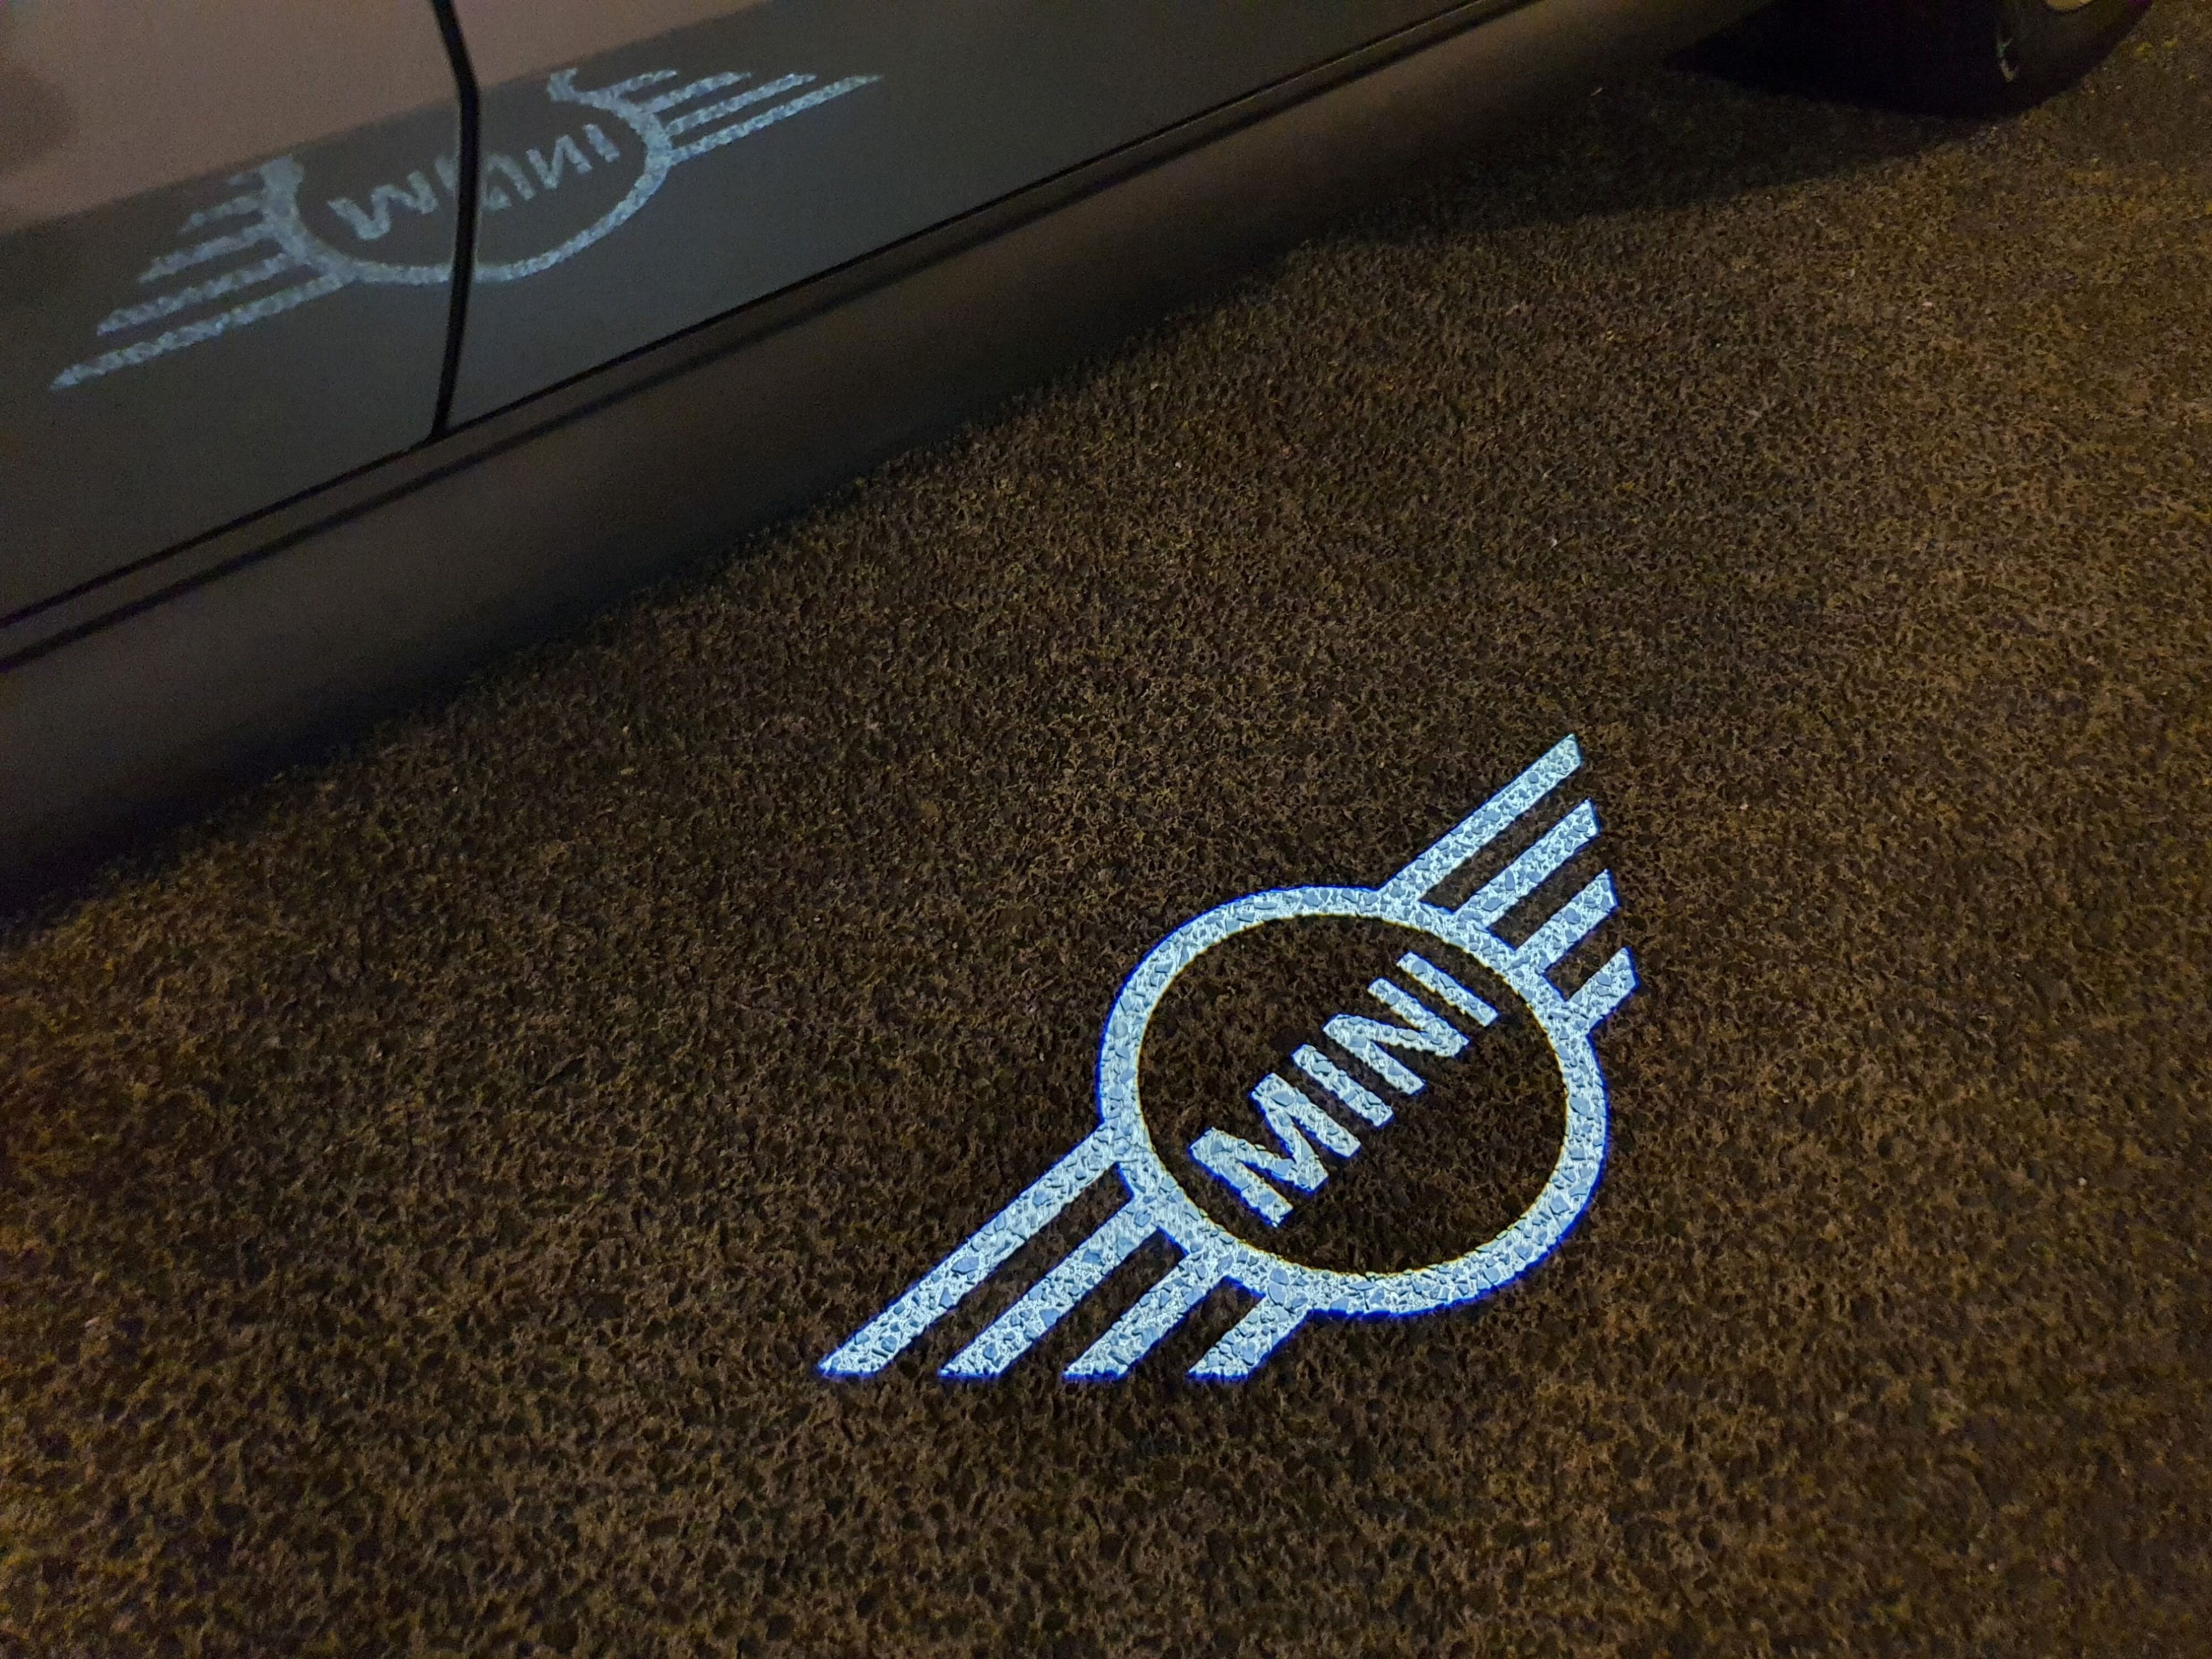 Puddle lighting of the Mini logo on the ground at night.